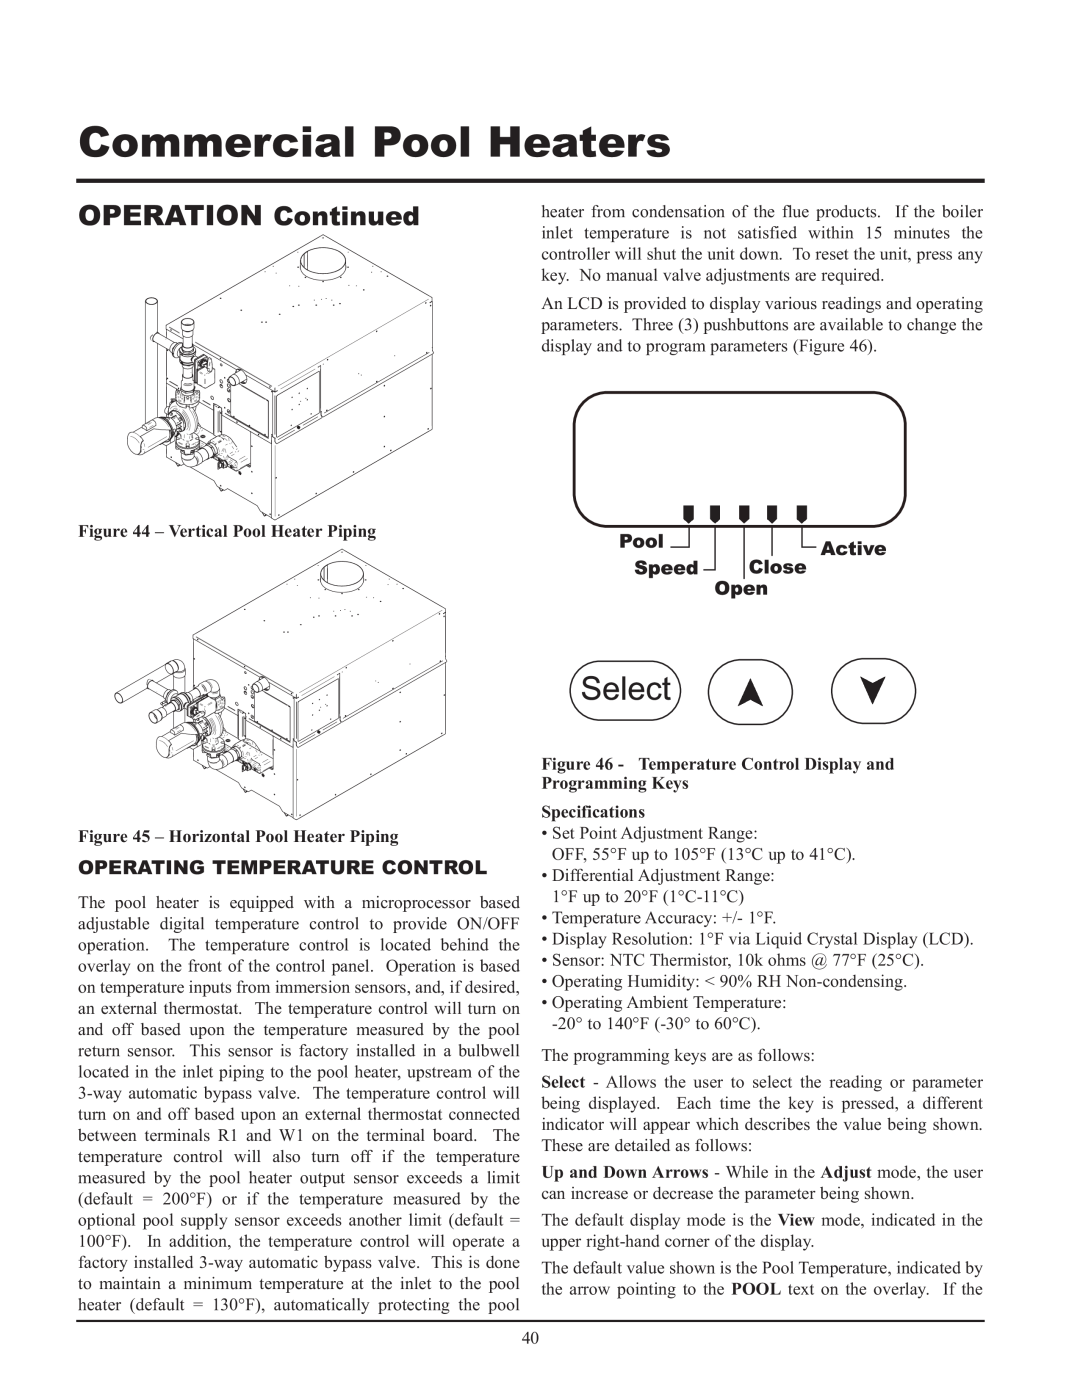 Lochinvar GAS HEATER FOR COMMERICAL POOL APPLICATIONS service manual OPERATION Continued, Operating Temperature Control 